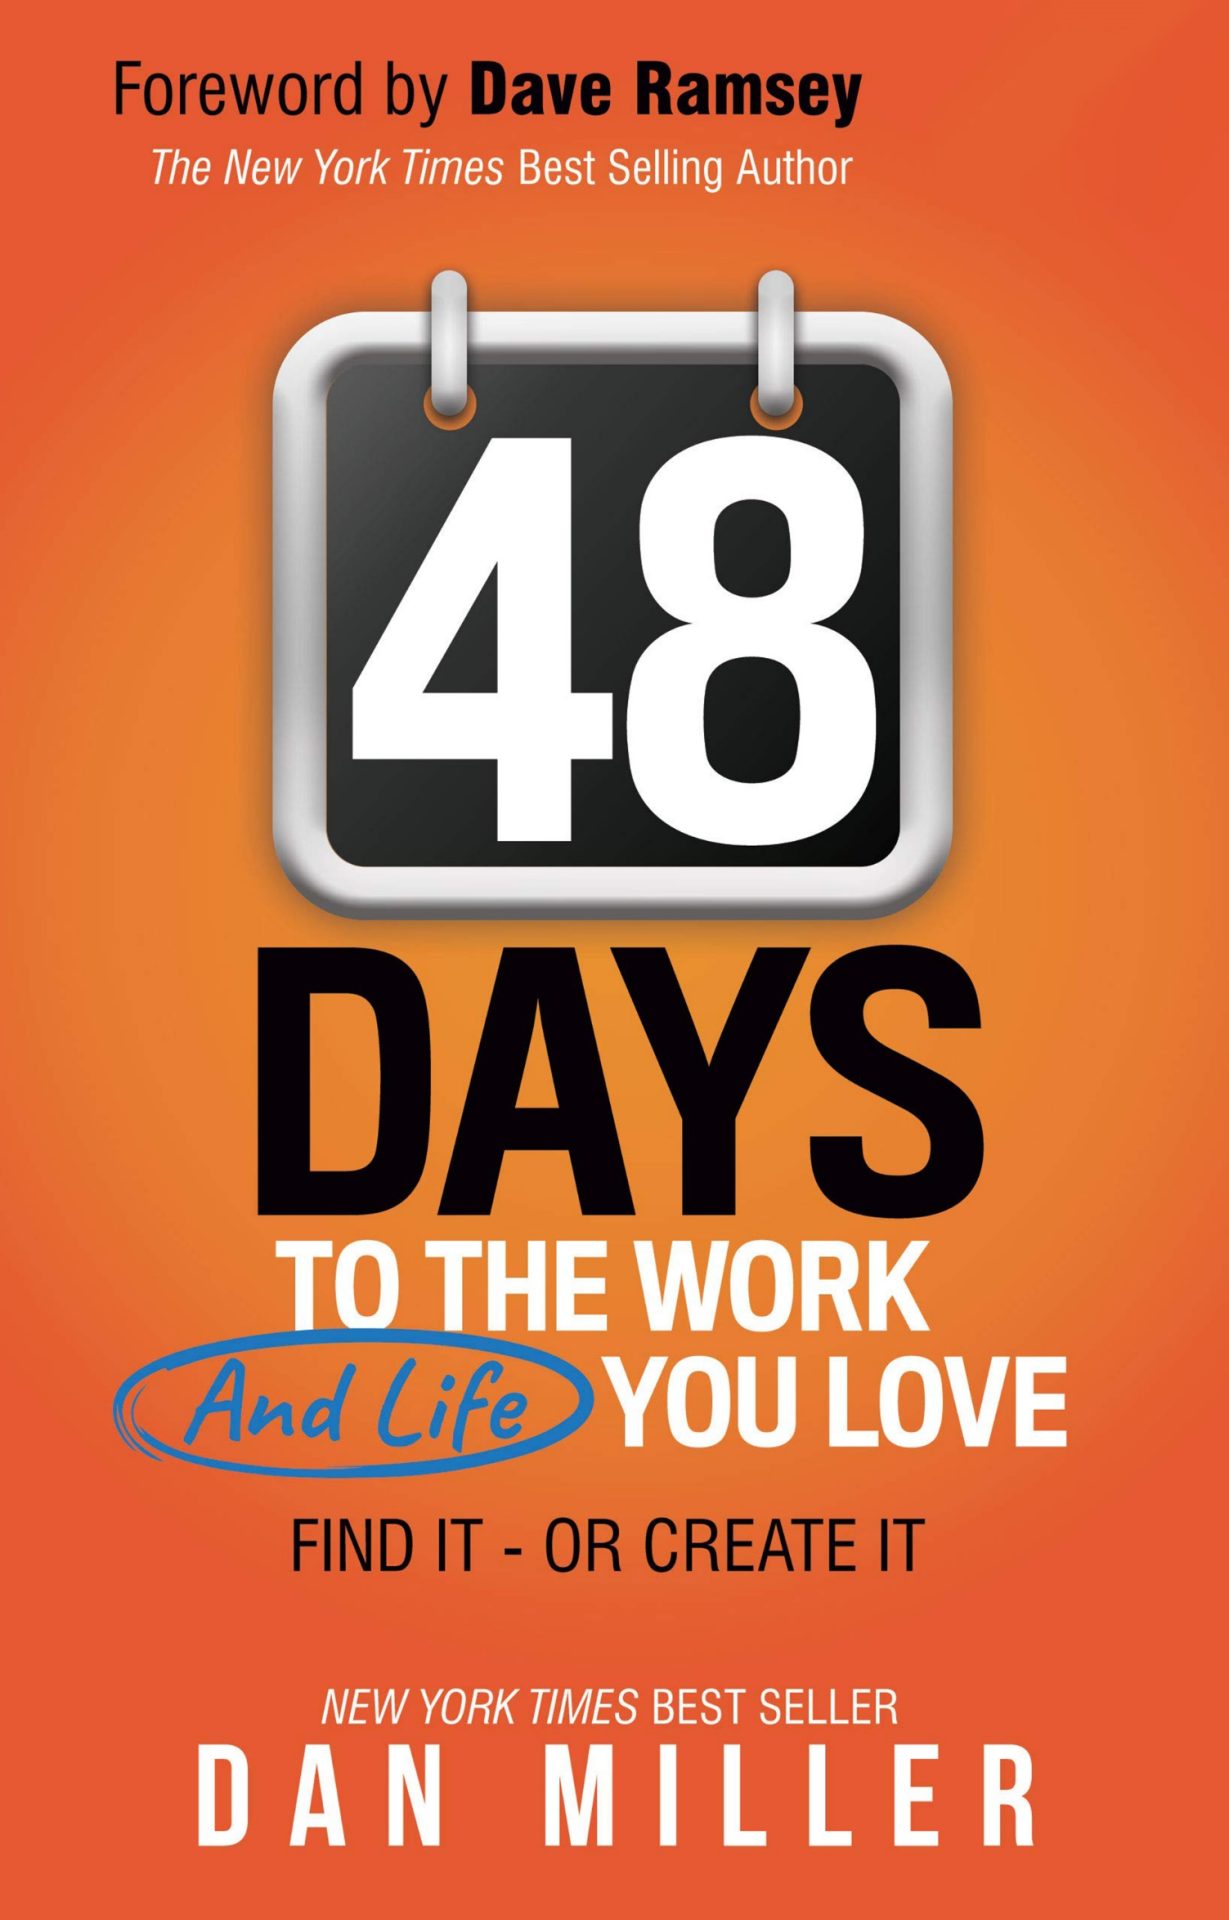 Cover of the book 48 days away from the job you love - Dan Miller